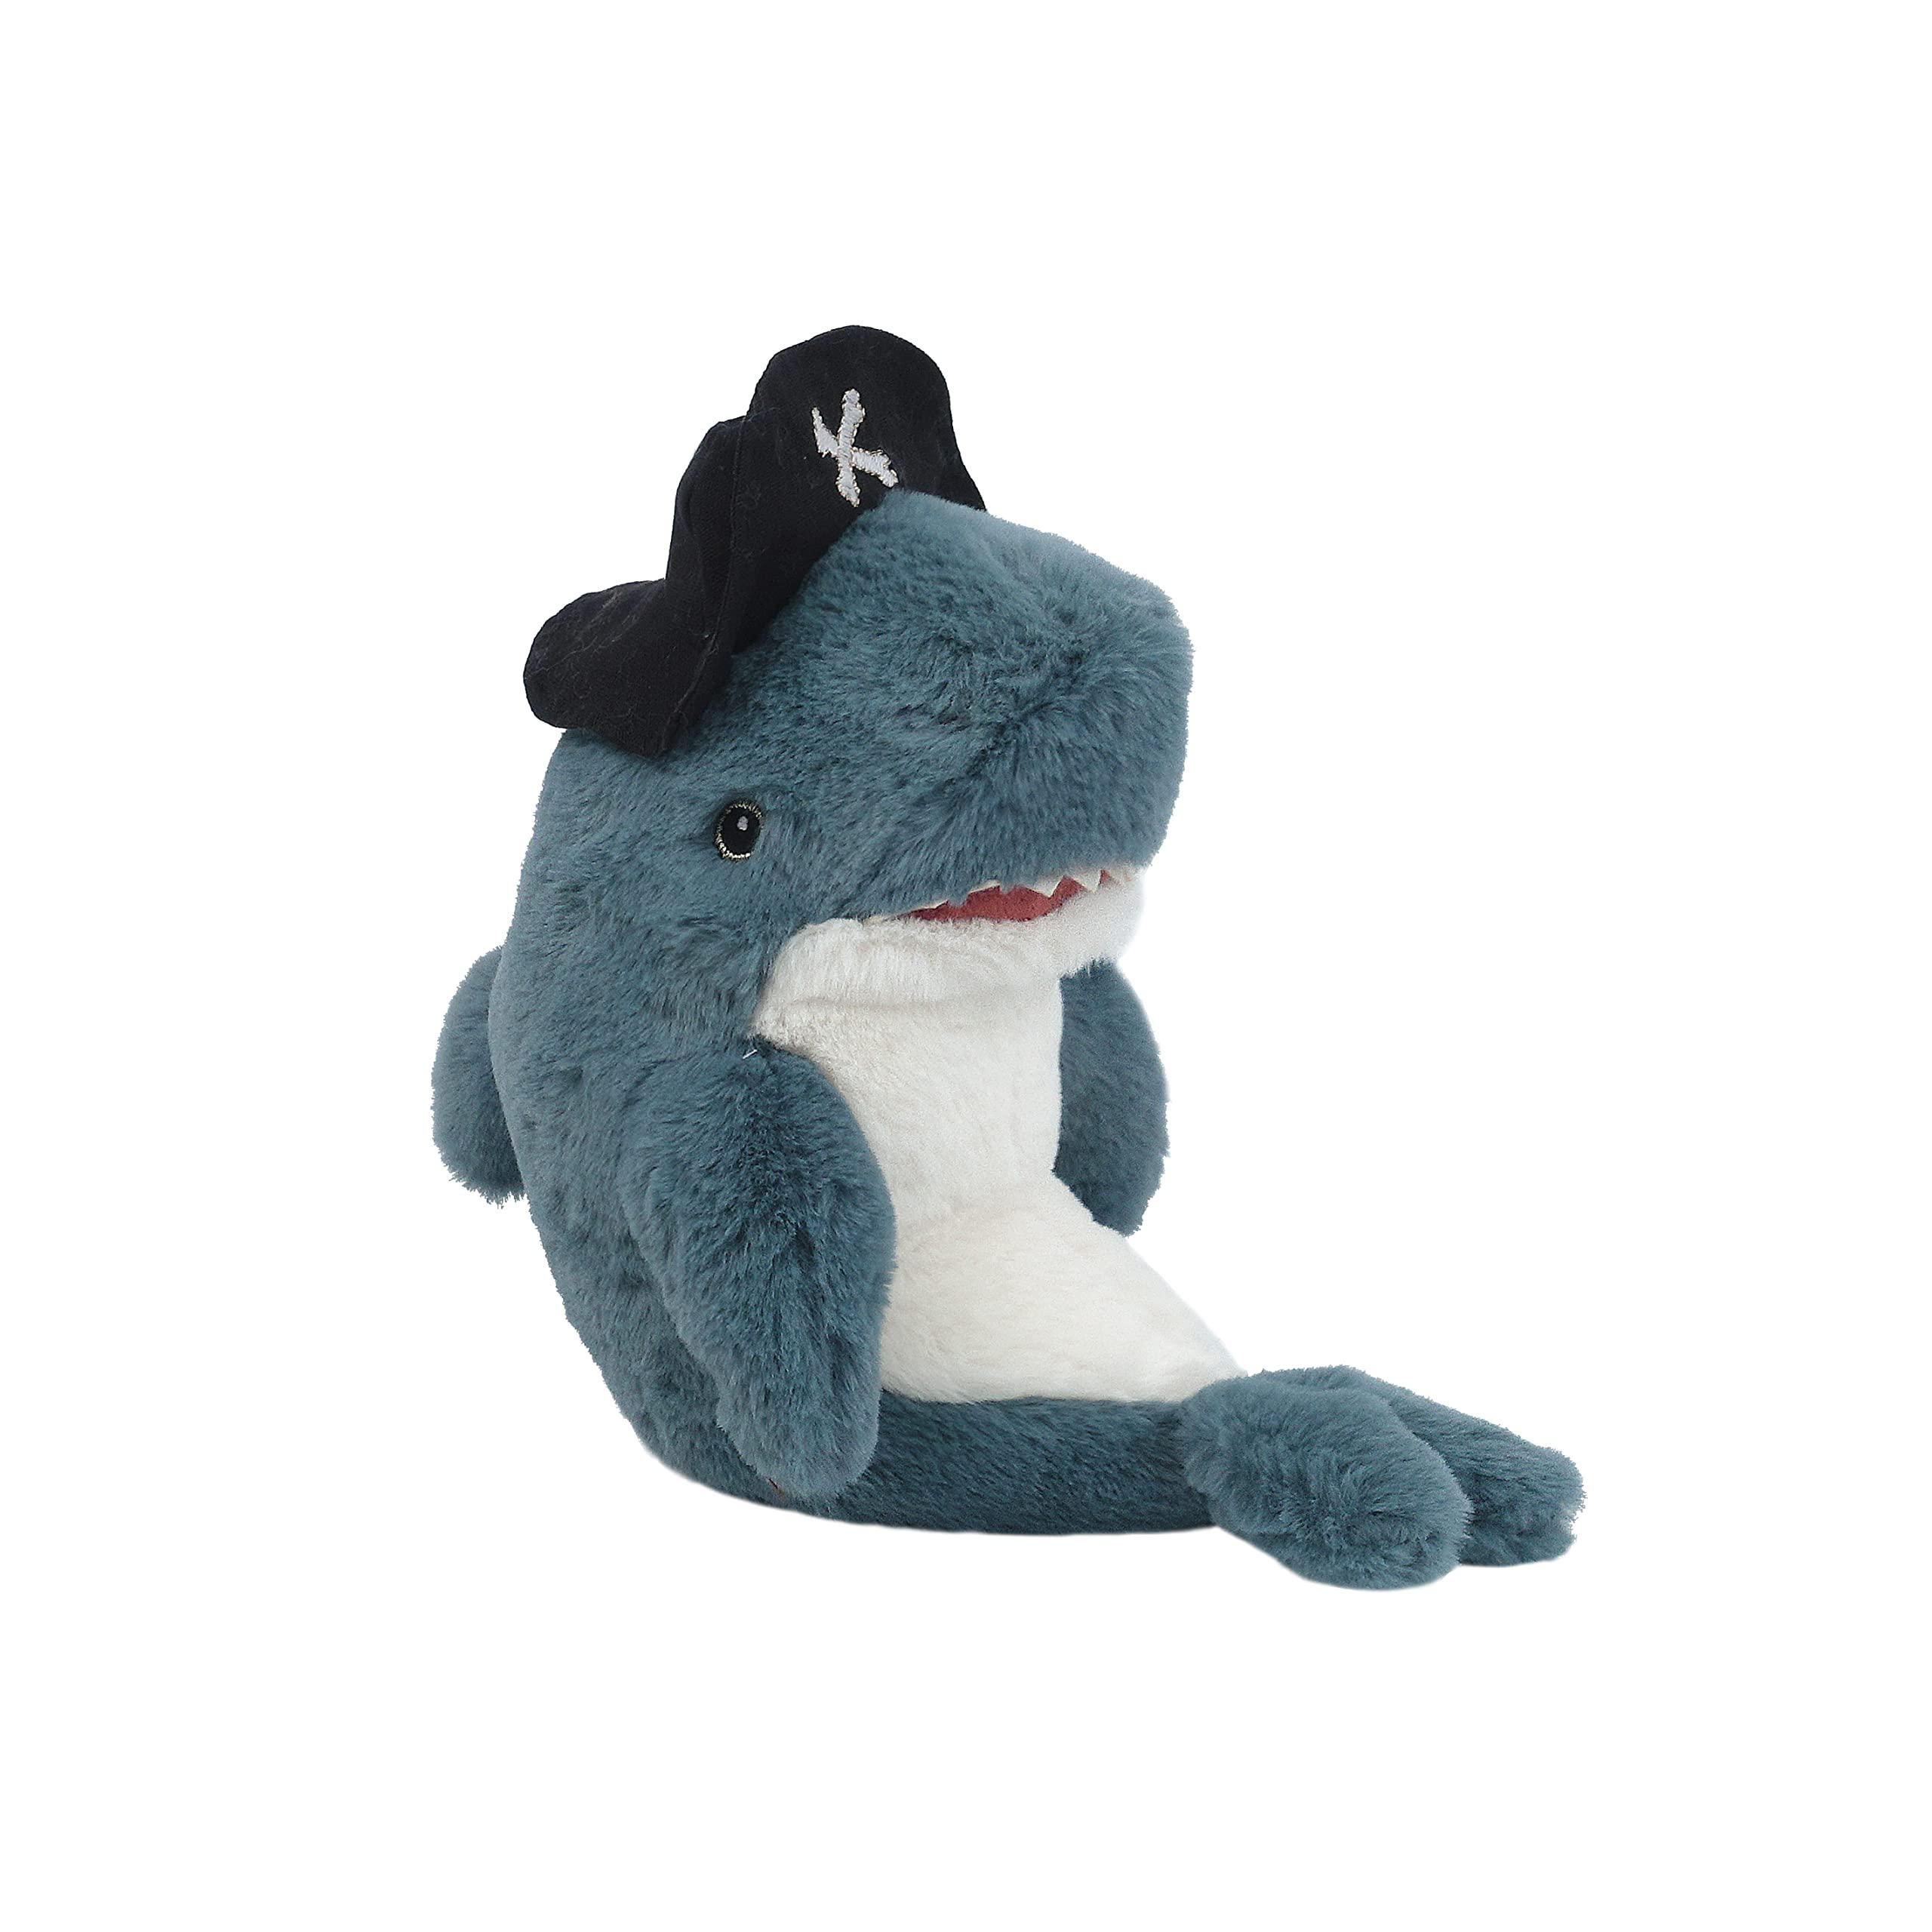 mon ami captain o'fish pirate shark stuffed animal toy - 12, handcrafted premium plush toy, soft cuddly toy gifts for little 